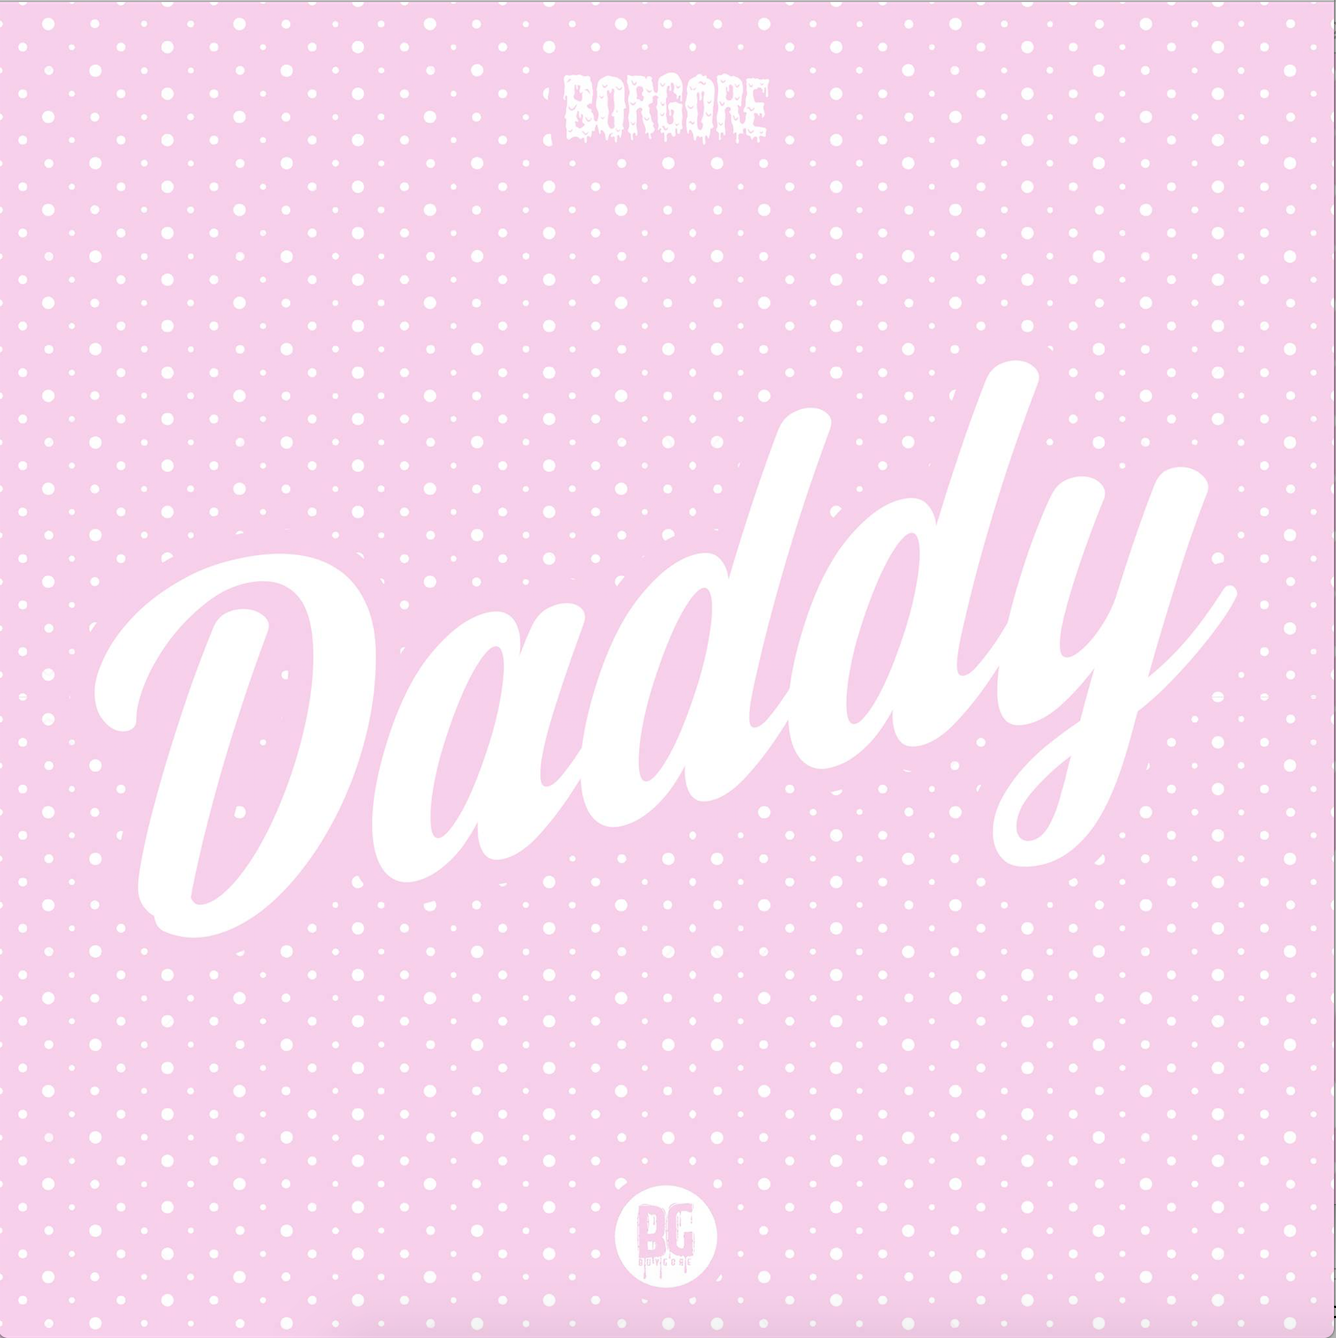 "Daddy" by Borgore